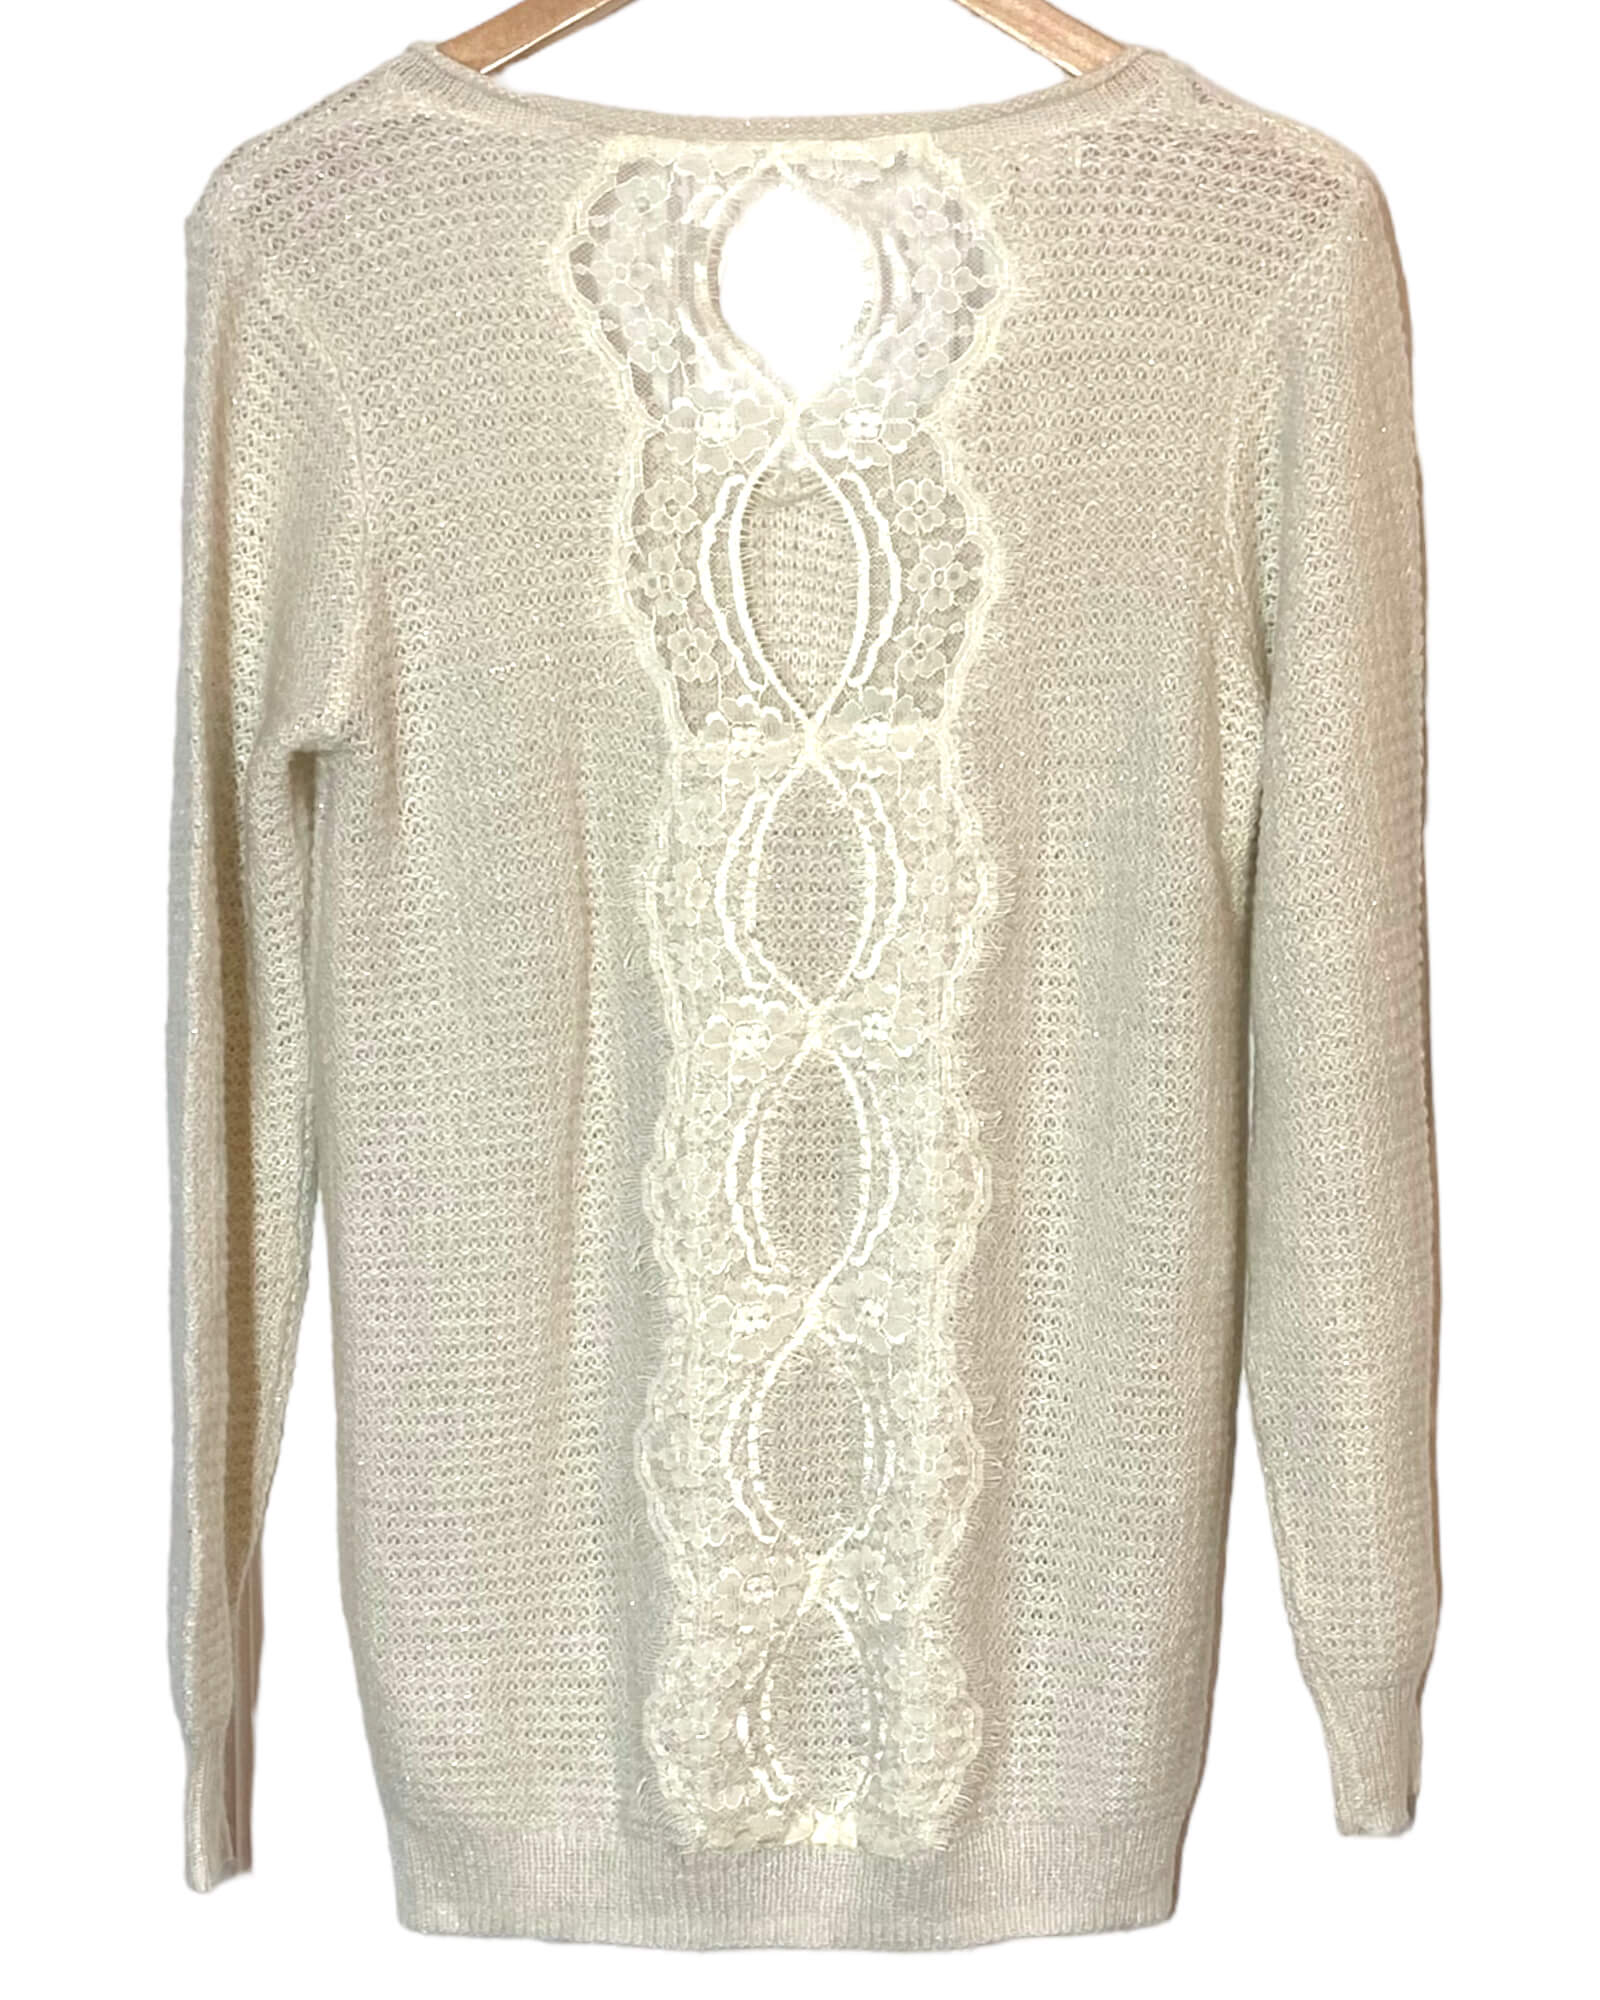 Bright Spring MAURICES creme and silver lace back sweater 